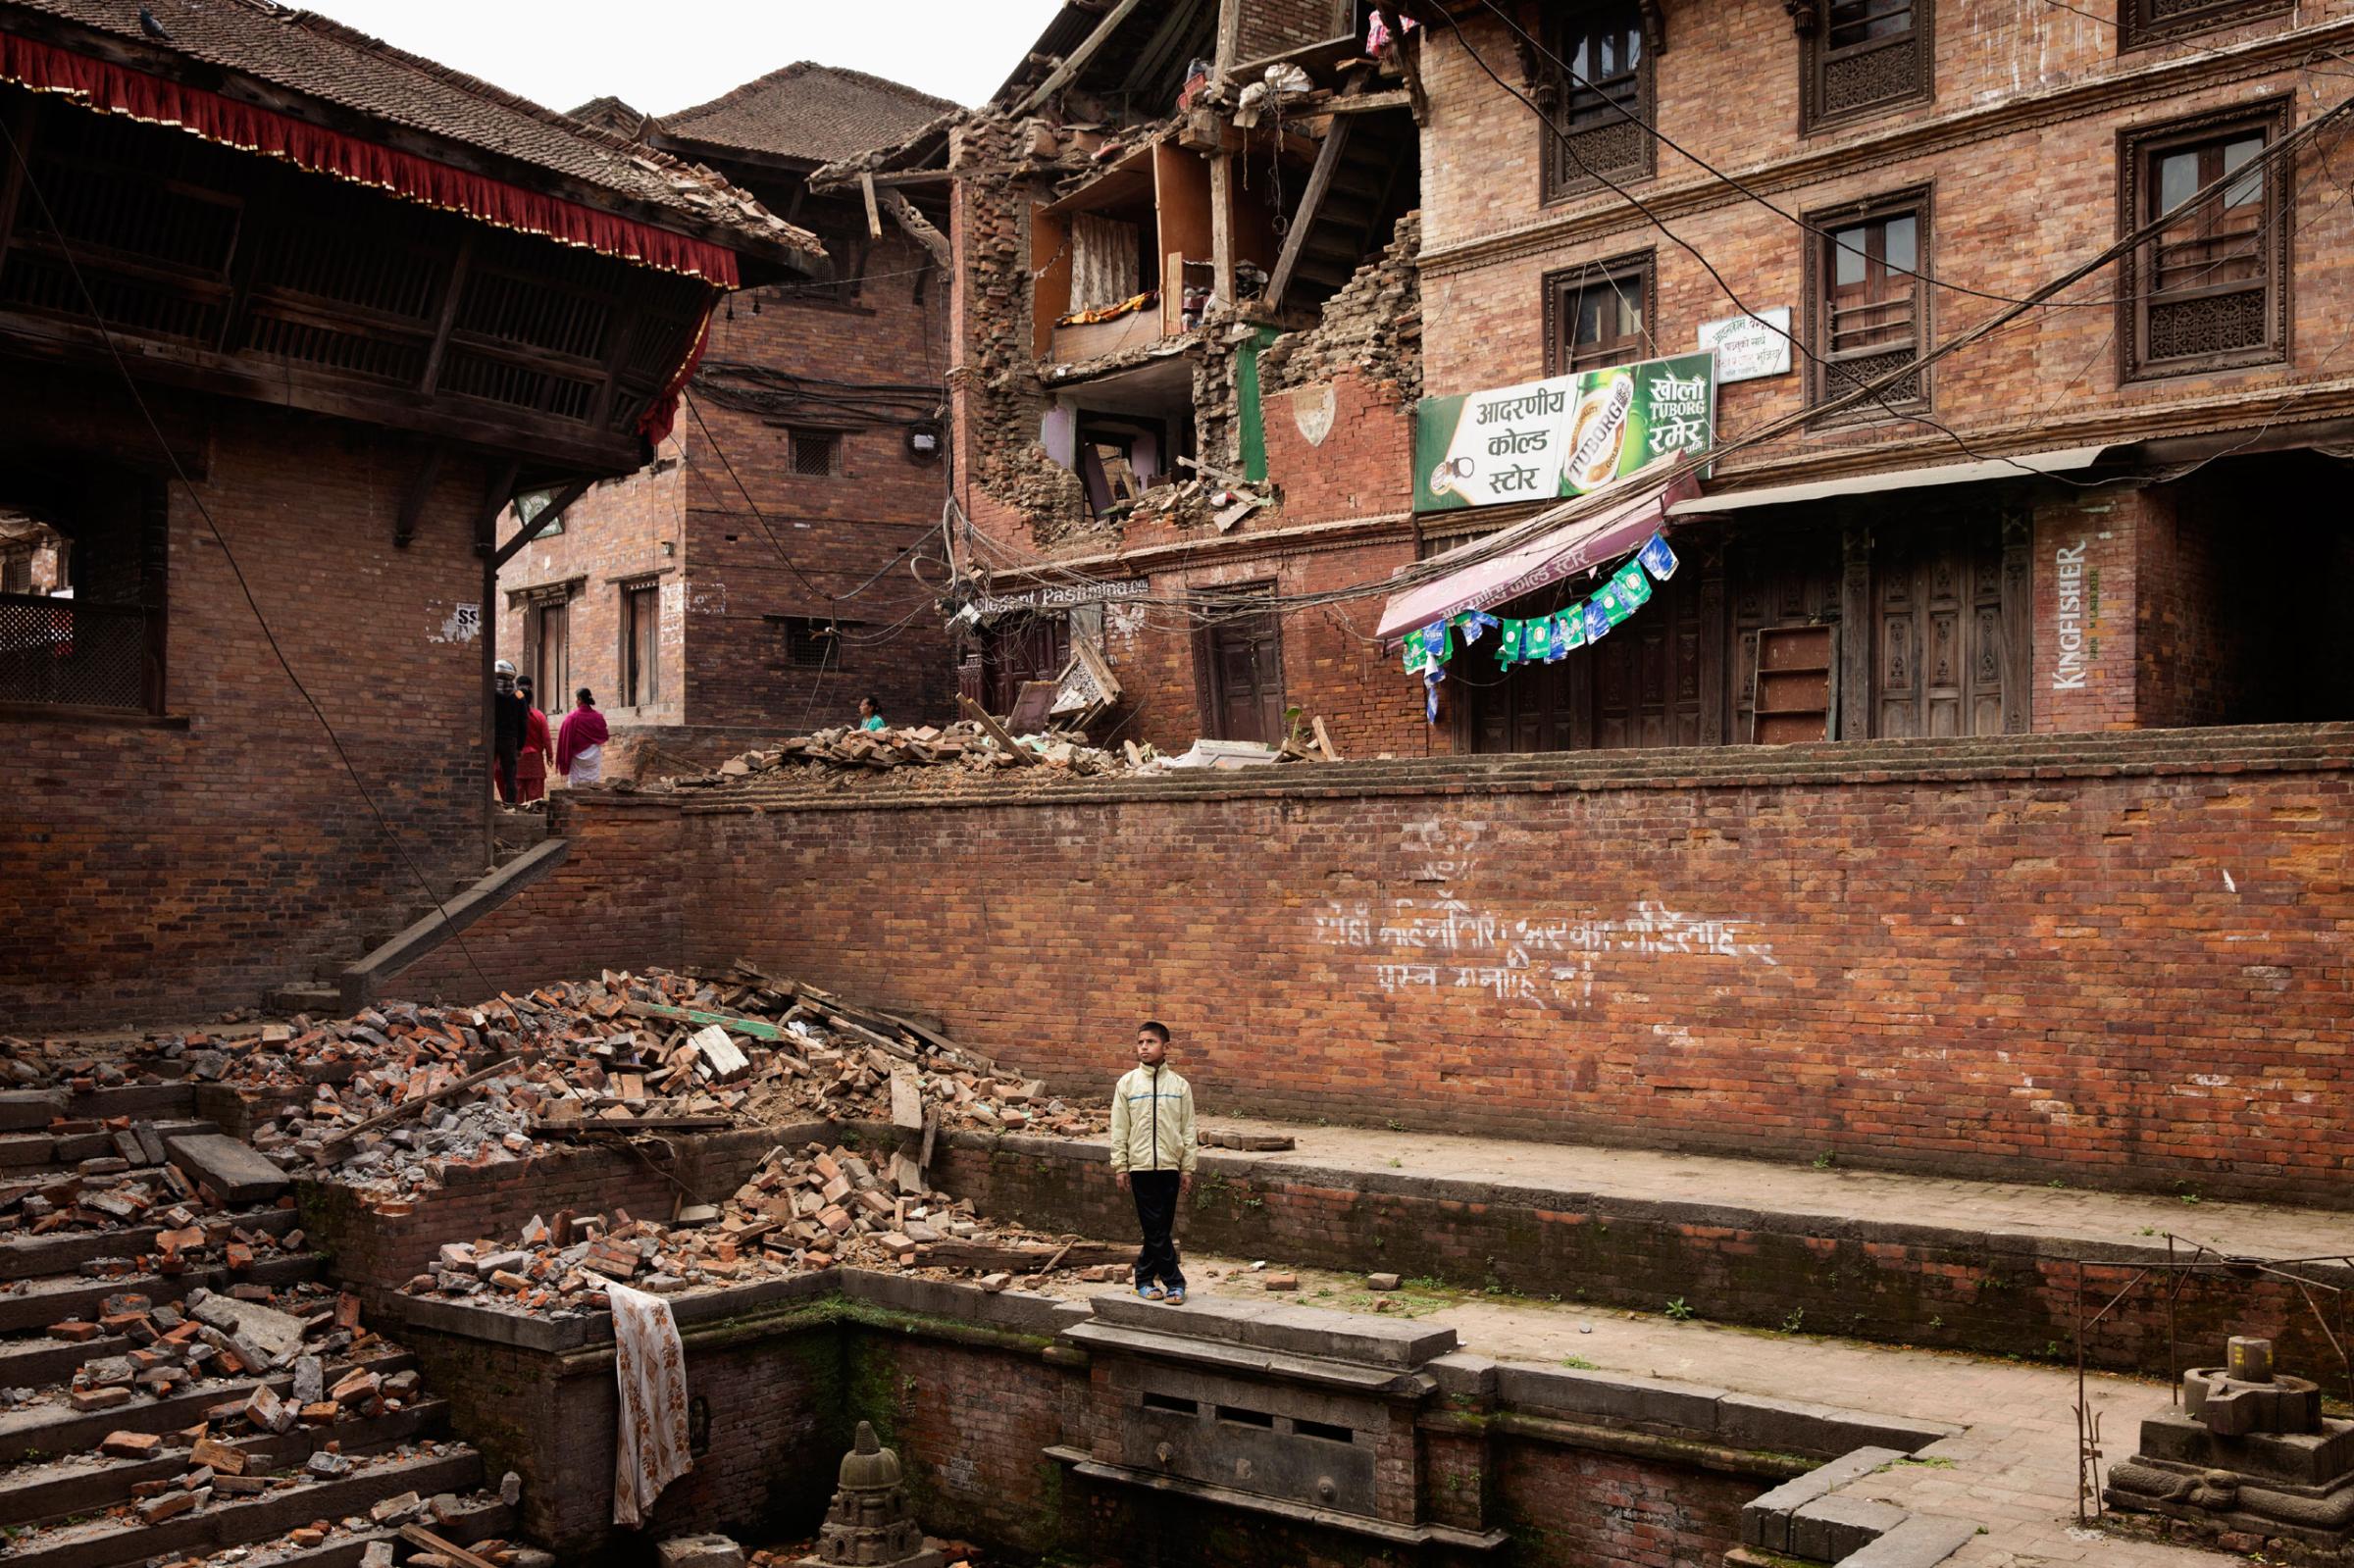 A Nepali boy stands amidst earthquake damage in the ancient city of Bhaktapur in the Kathmandu Valley on April. 28, 2015. Nepal had a severe earthquake on April 25th. Photo by Adam Ferguson for Time